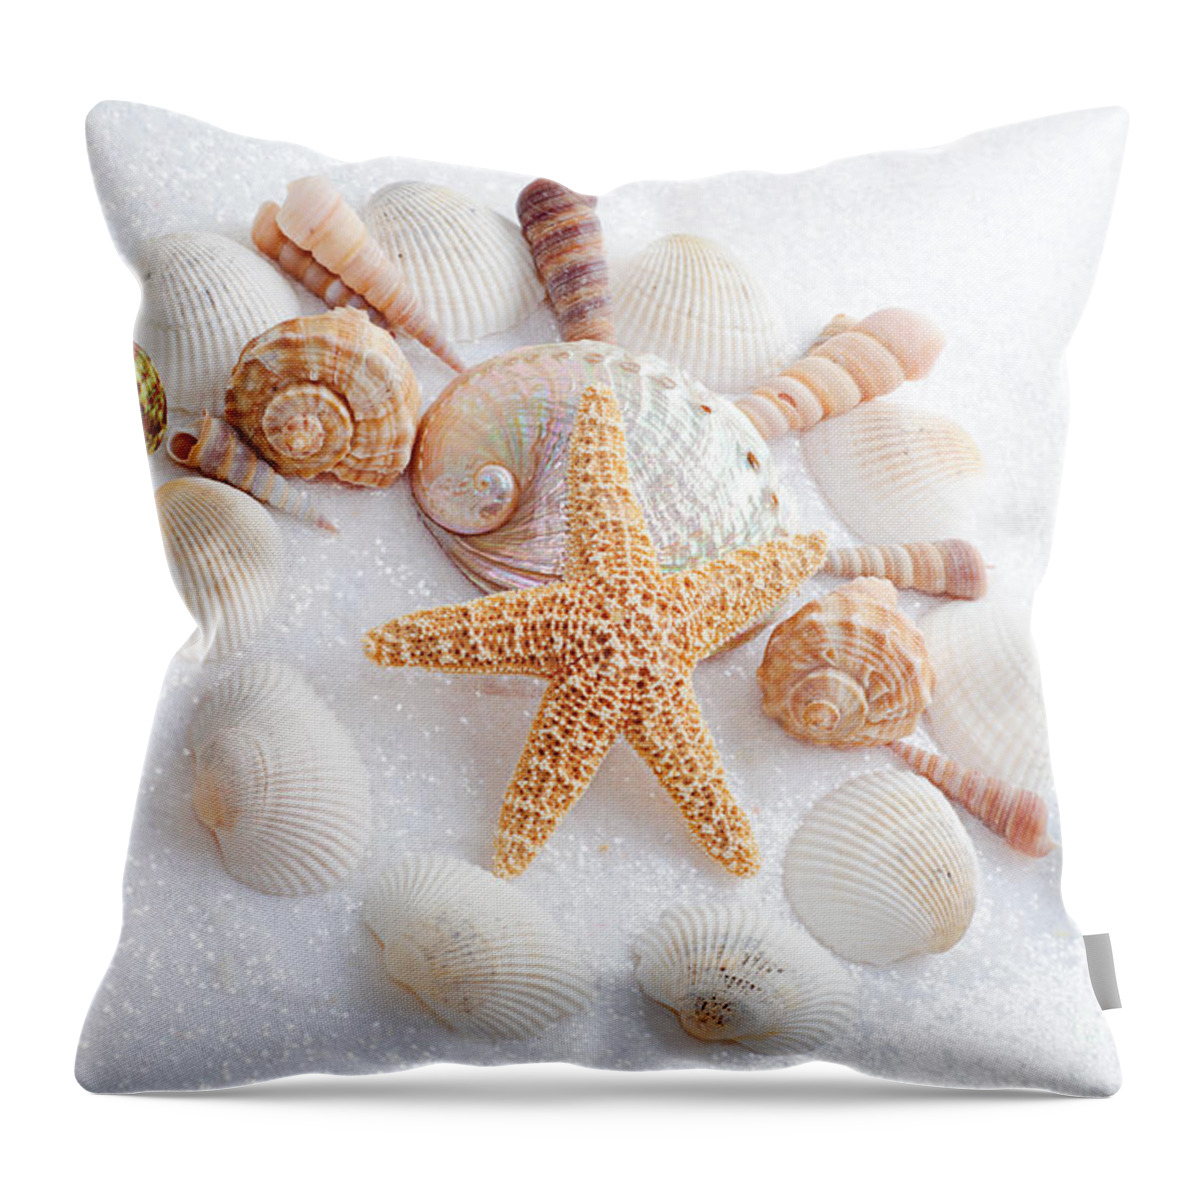  Seashells Throw Pillow featuring the photograph North Carolina Sea Shells by Andee Design